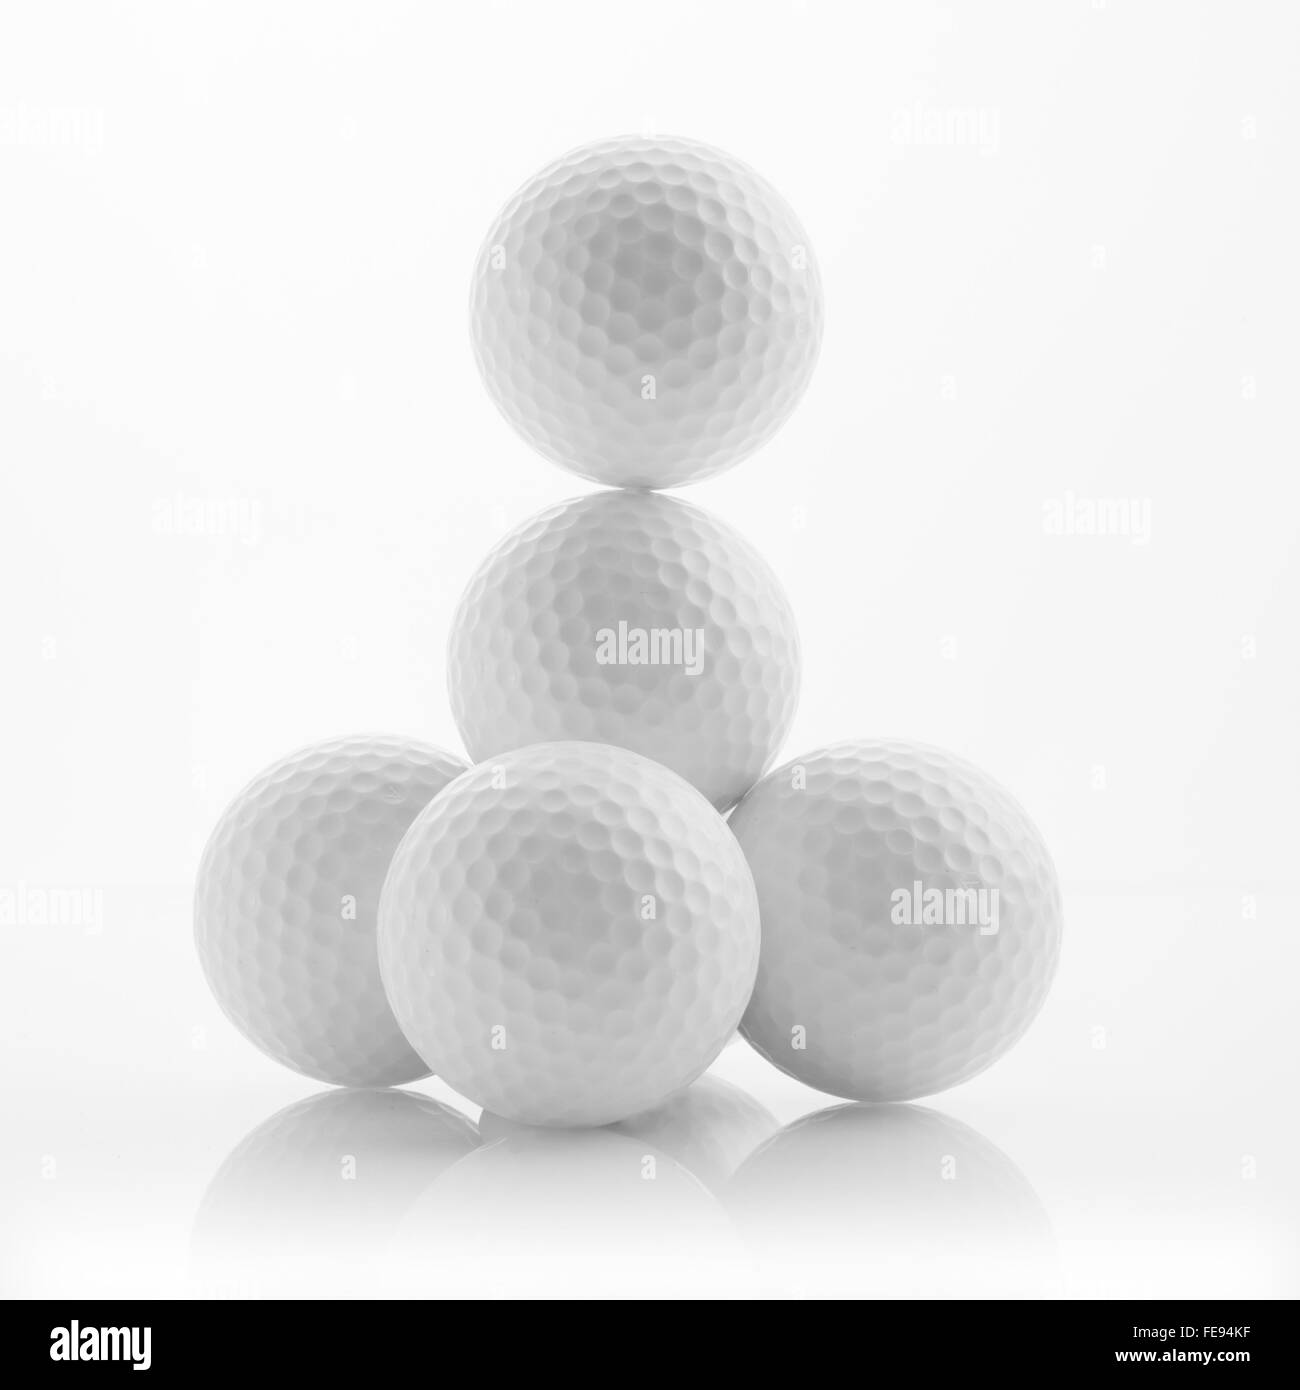 Pile Of Golf Balls on a White Background Stock Photo - Alamy